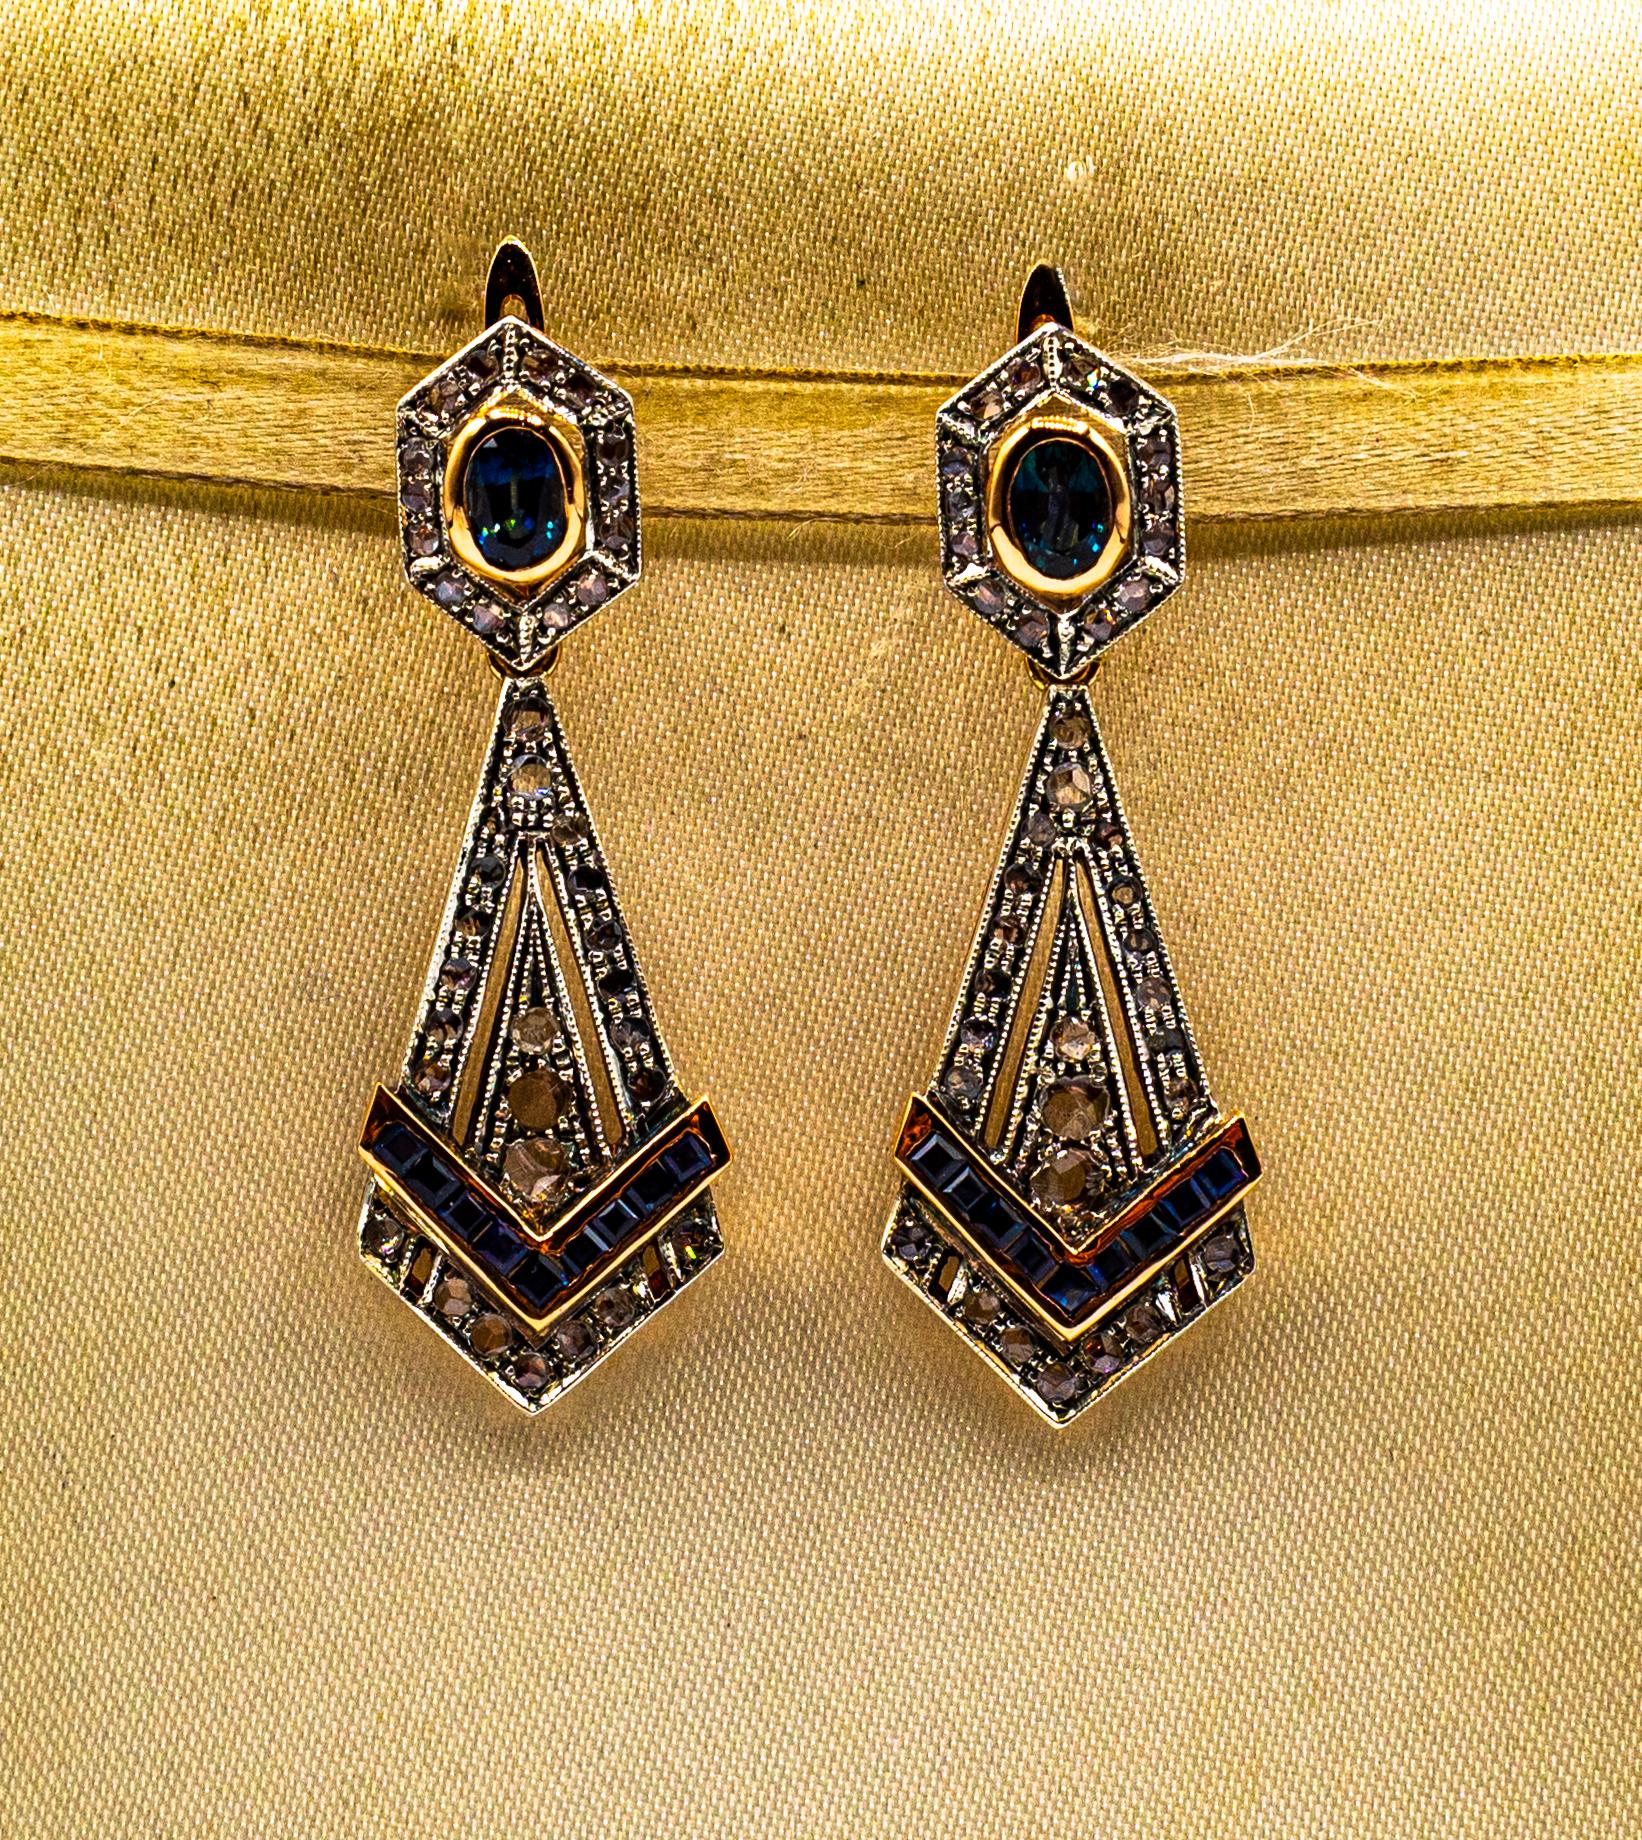 For any problems related to some materials contained in the items that do not allow shipping, please contact the seller with a private message to solve the problem.
We can ship every piece of our 1stdibs catalog worldwide.

These Earrings are made